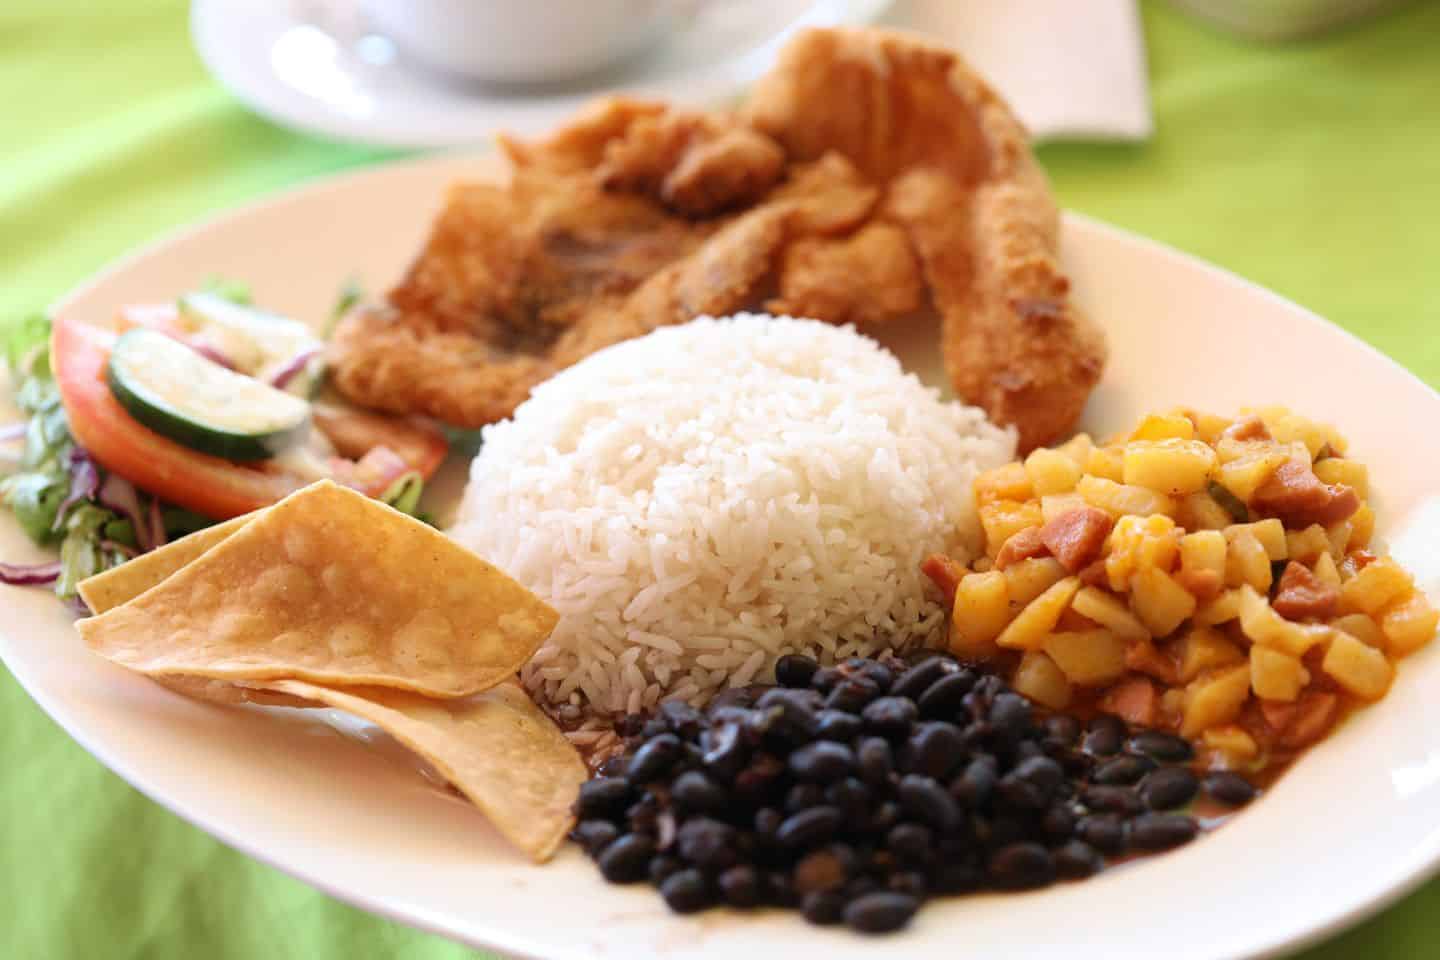 Where to Eat in Costa Rica With Kids